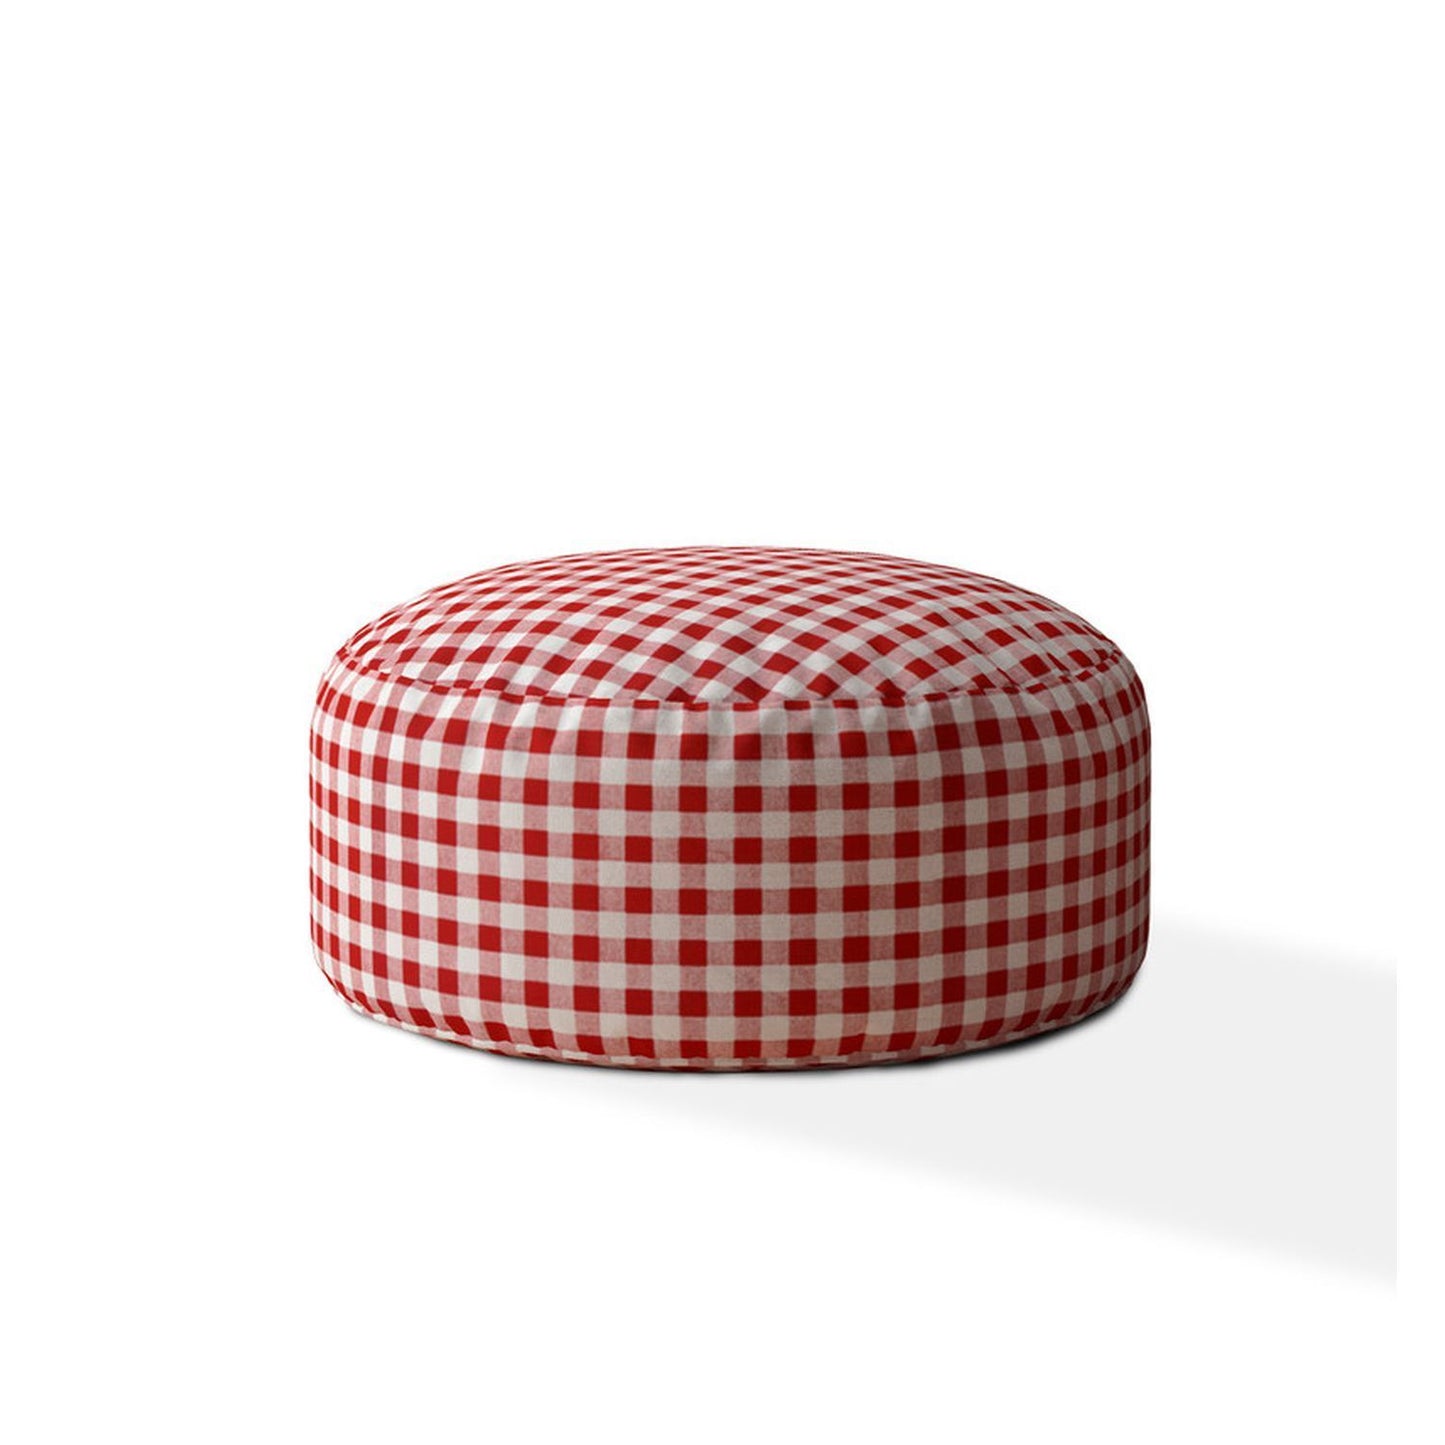 Indoor PLAIDO Bright Red Round Zipper Pouf - Cover Only - 24in dia x 20in tall